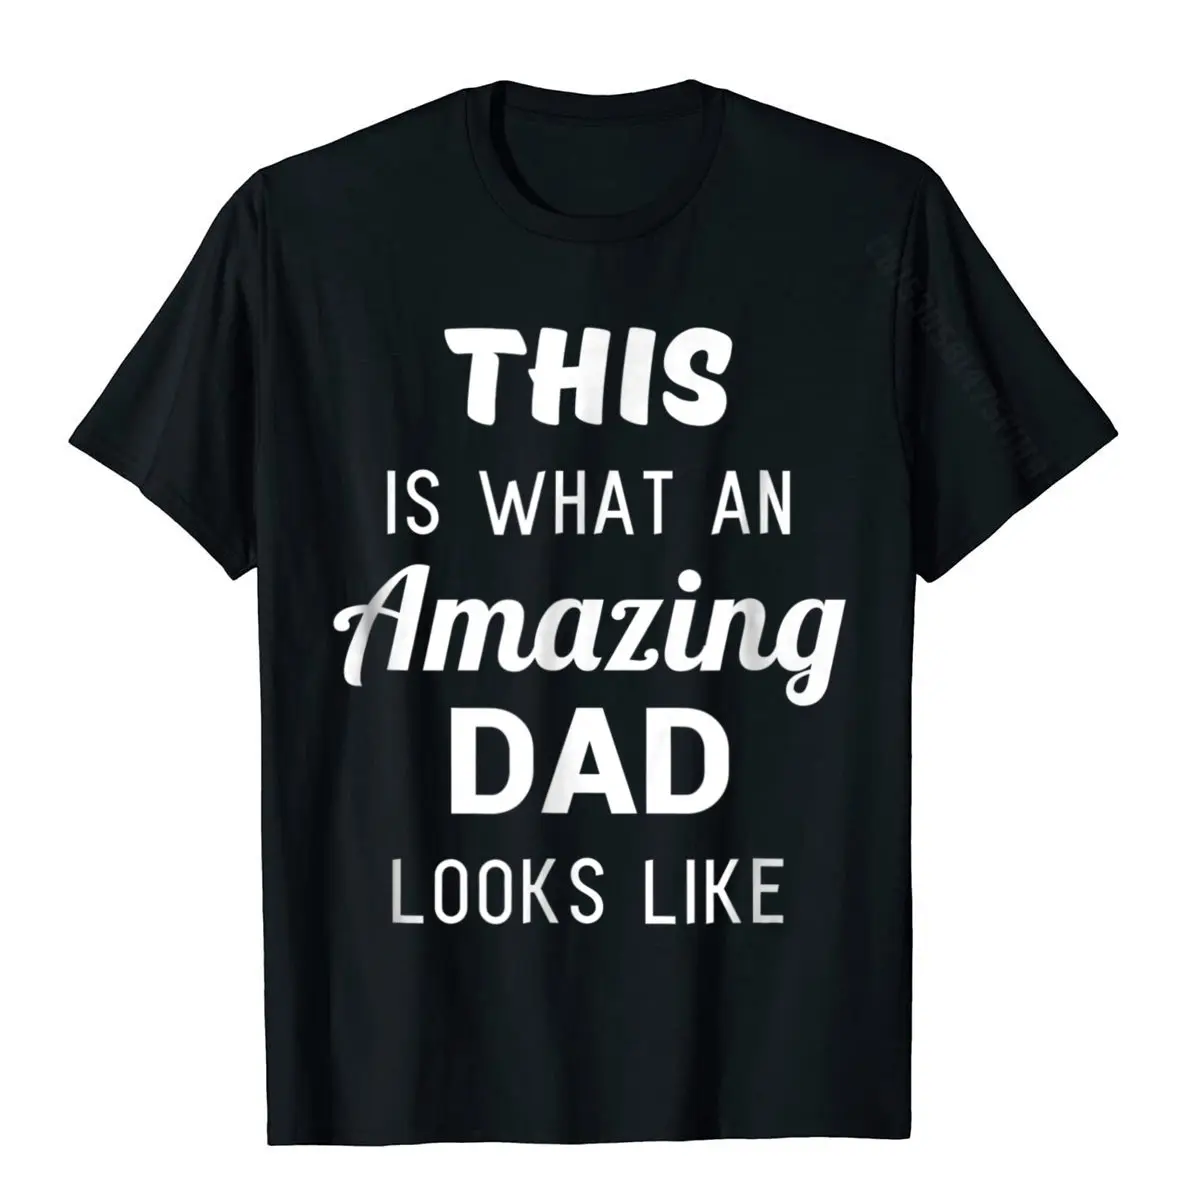 

Funny Fathers Day Shirt Gift From Son Daughter Kids Wife Cool Tops T Shirt Cotton Young Tshirts Cool Brand New